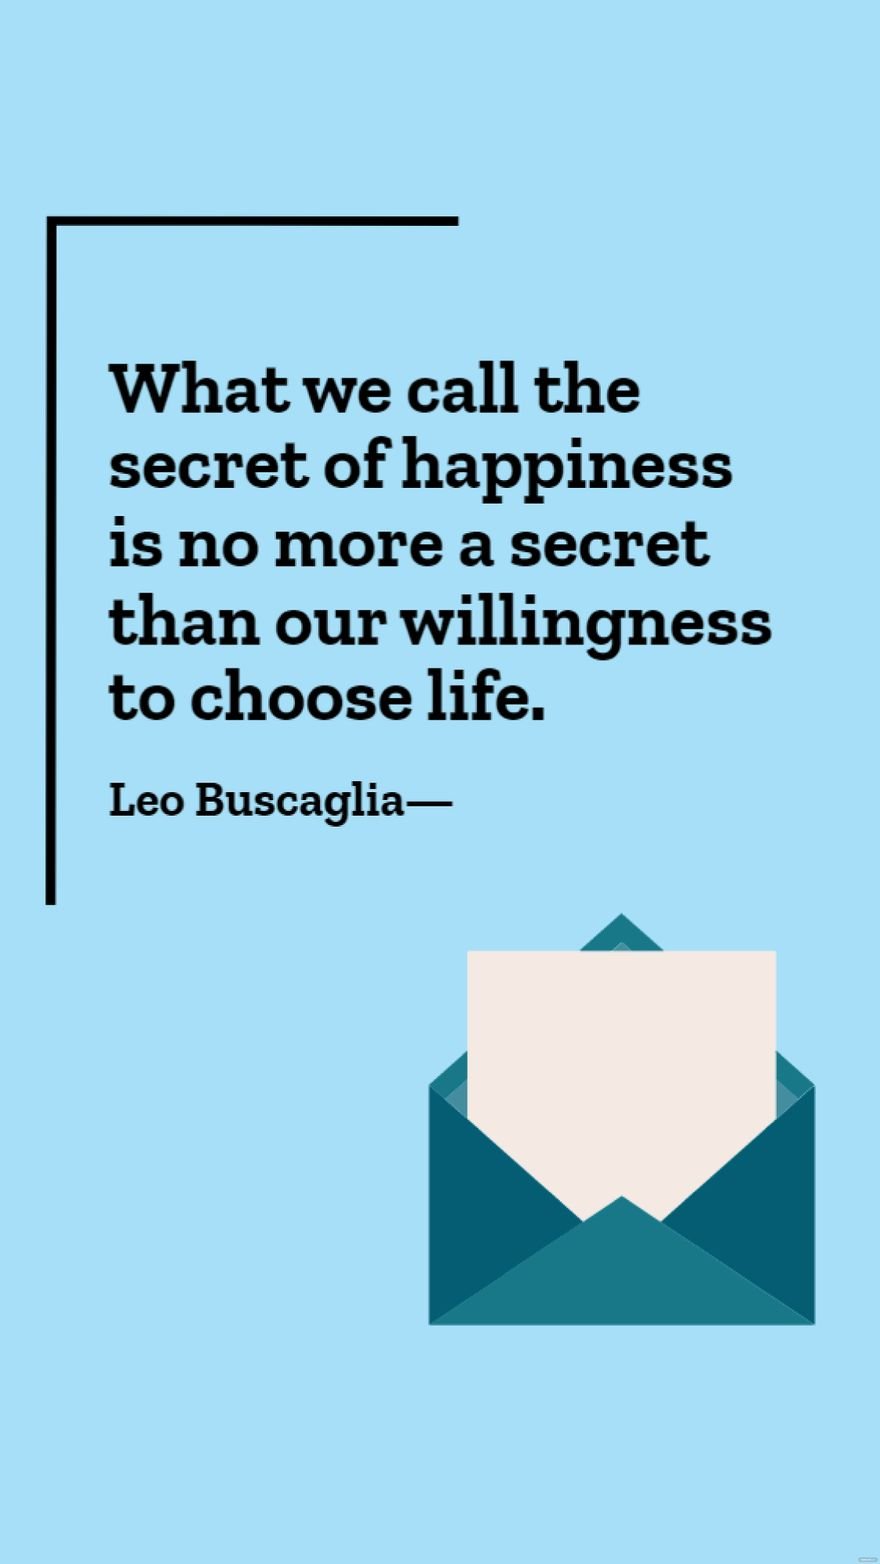 Leo Buscaglia - What we call the secret of happiness is no more a secret than our willingness to choose life.